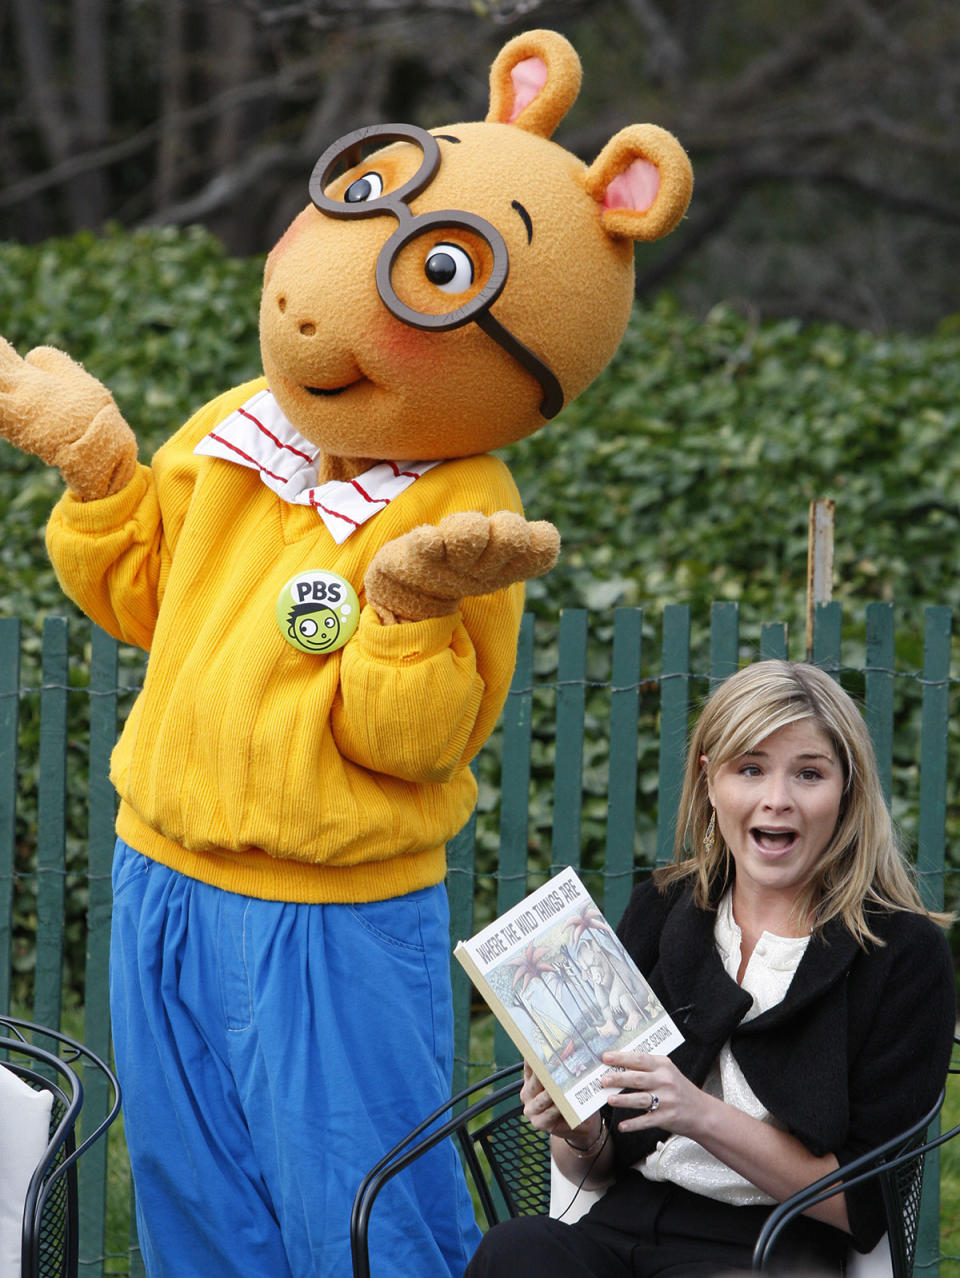 <p>Jenna Bush, daughter of President George W. Bush, sits alongside someone dressed as “Arthur” as she prepares to read the book “Where the Wild Things Are” at the annual Easter Egg Roll on the South Lawn of the White House in Washington, March 24, 2008. The traditional White House event dates back to 1878. (Photo: Jason Reed/Reuters) </p>